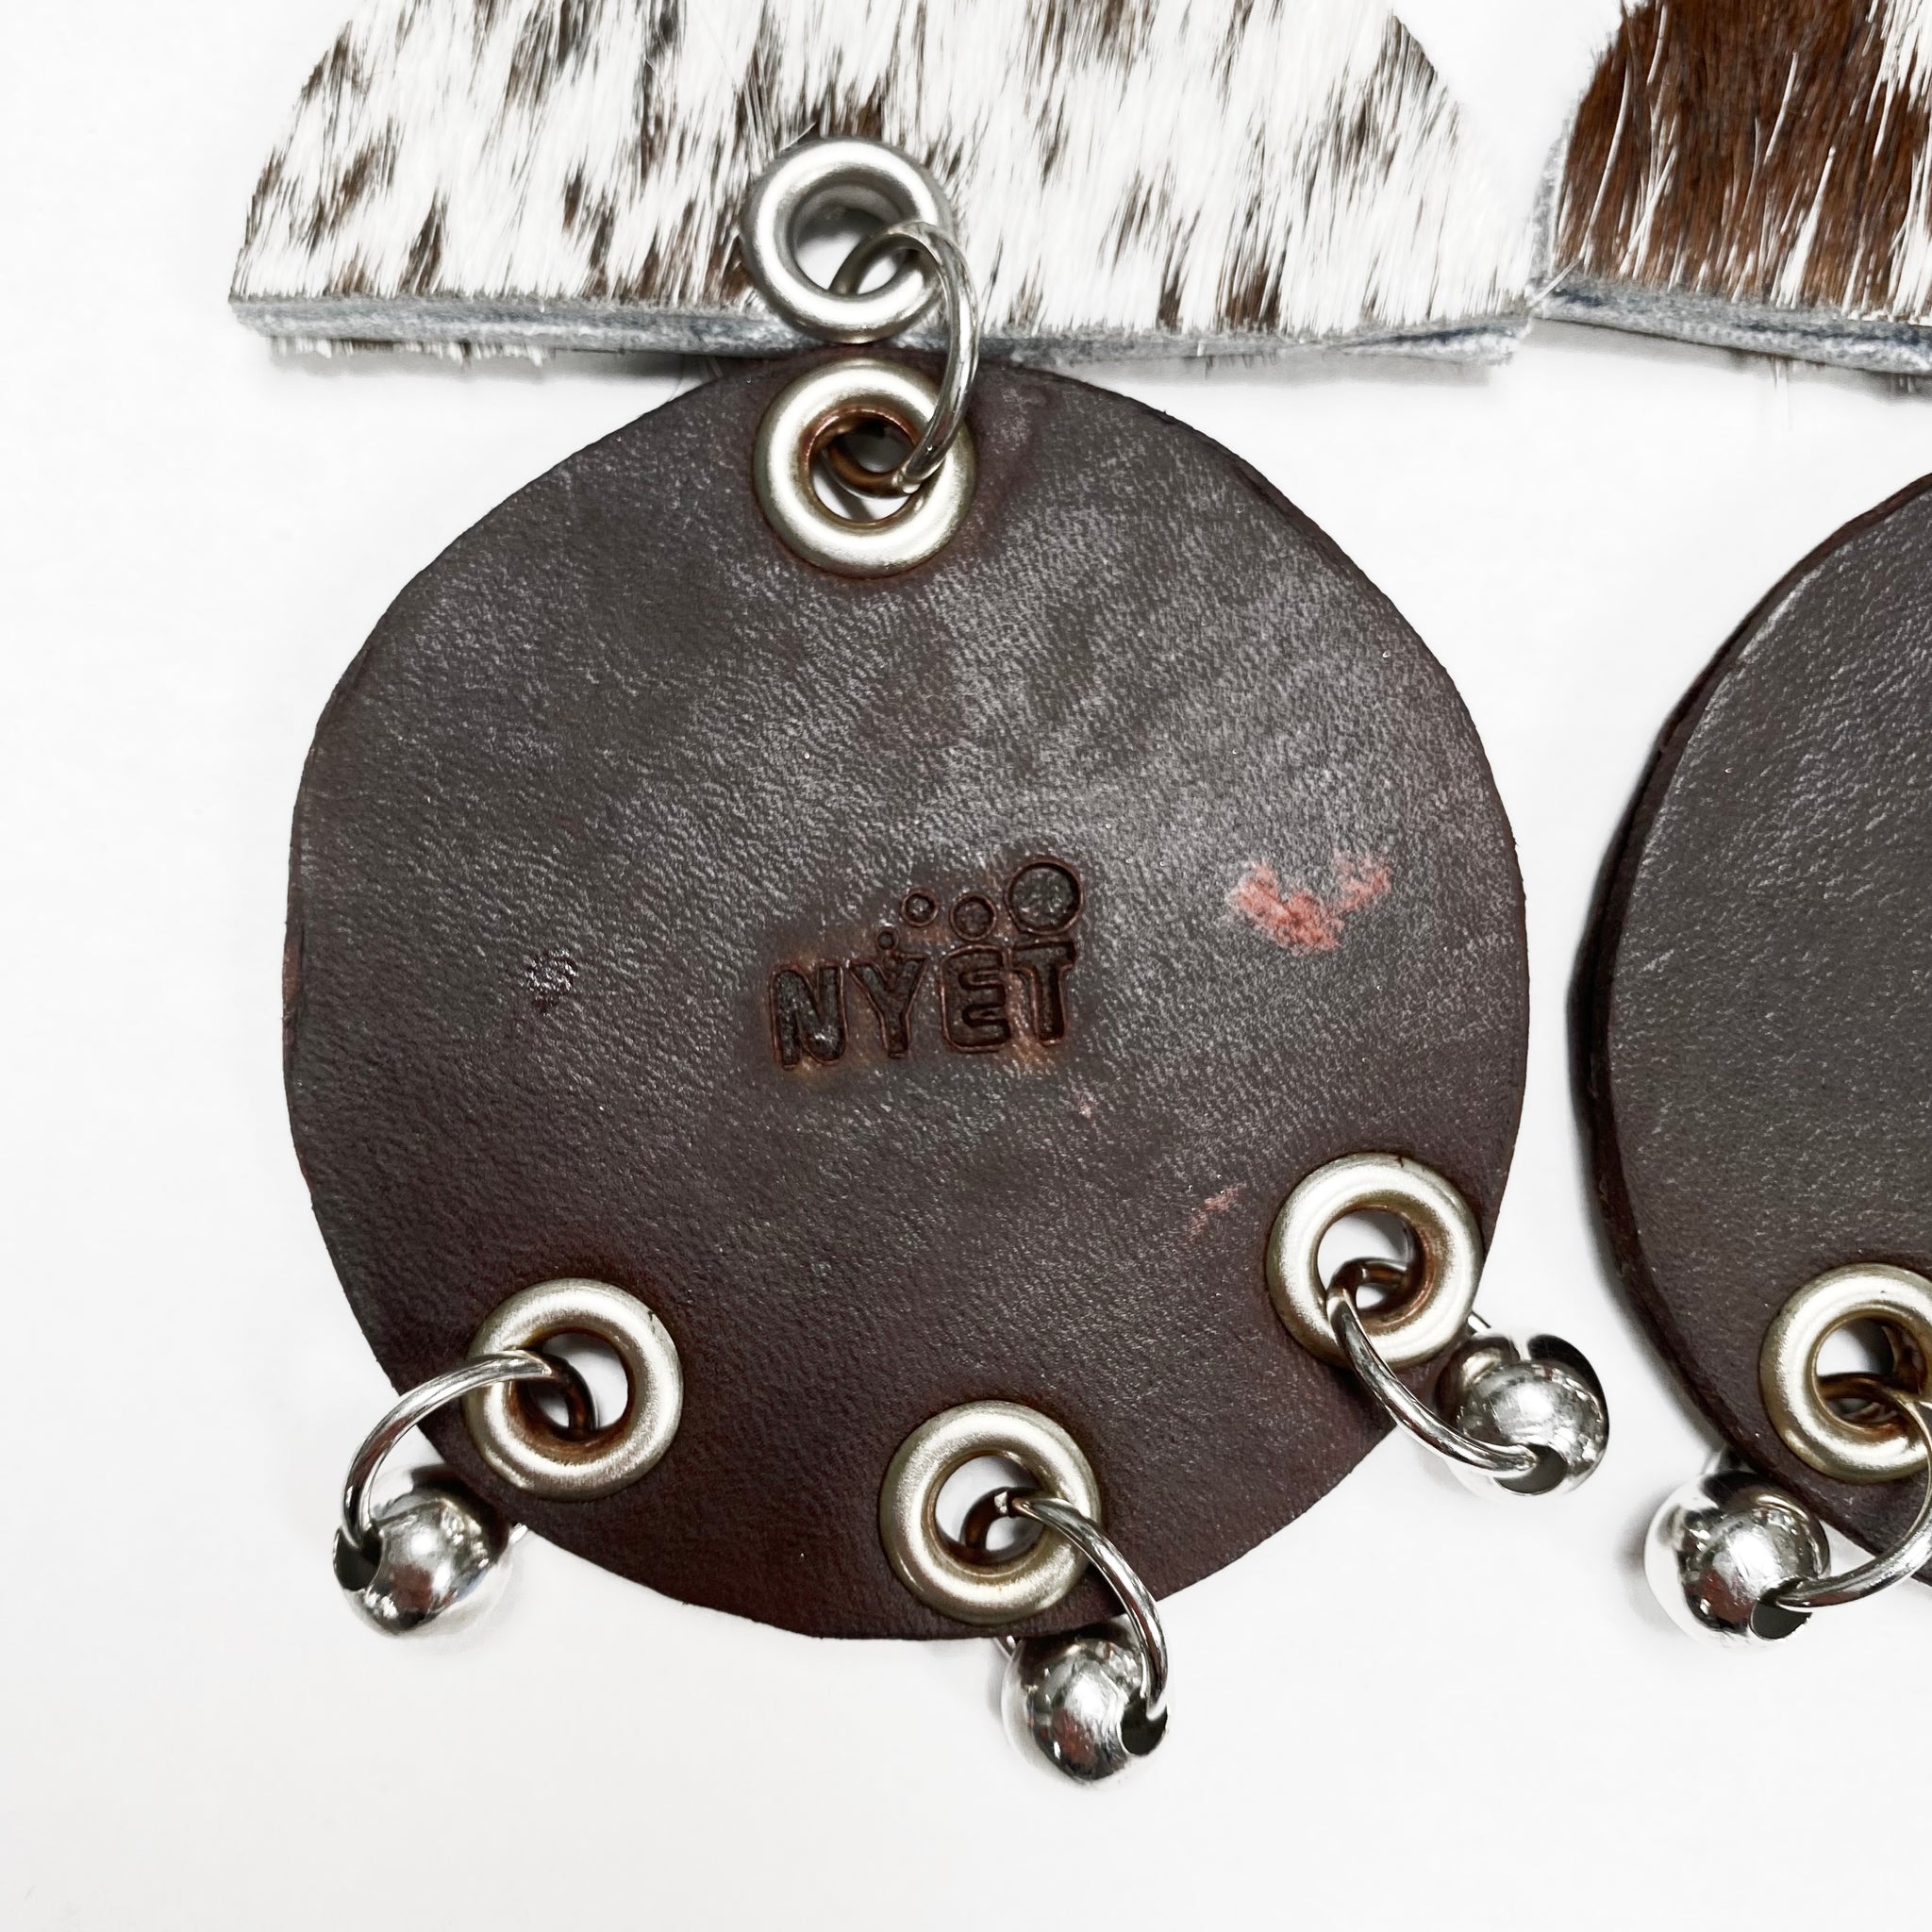 WIDE HAIR-ON AND TANNED COWHIDE EARRINGS WITH SEMI CIRCLE  AND LARGE CIRCLE PENDANTS ADORNED WITH STAINLESS STEEL BEADS. by NYET Jewelry